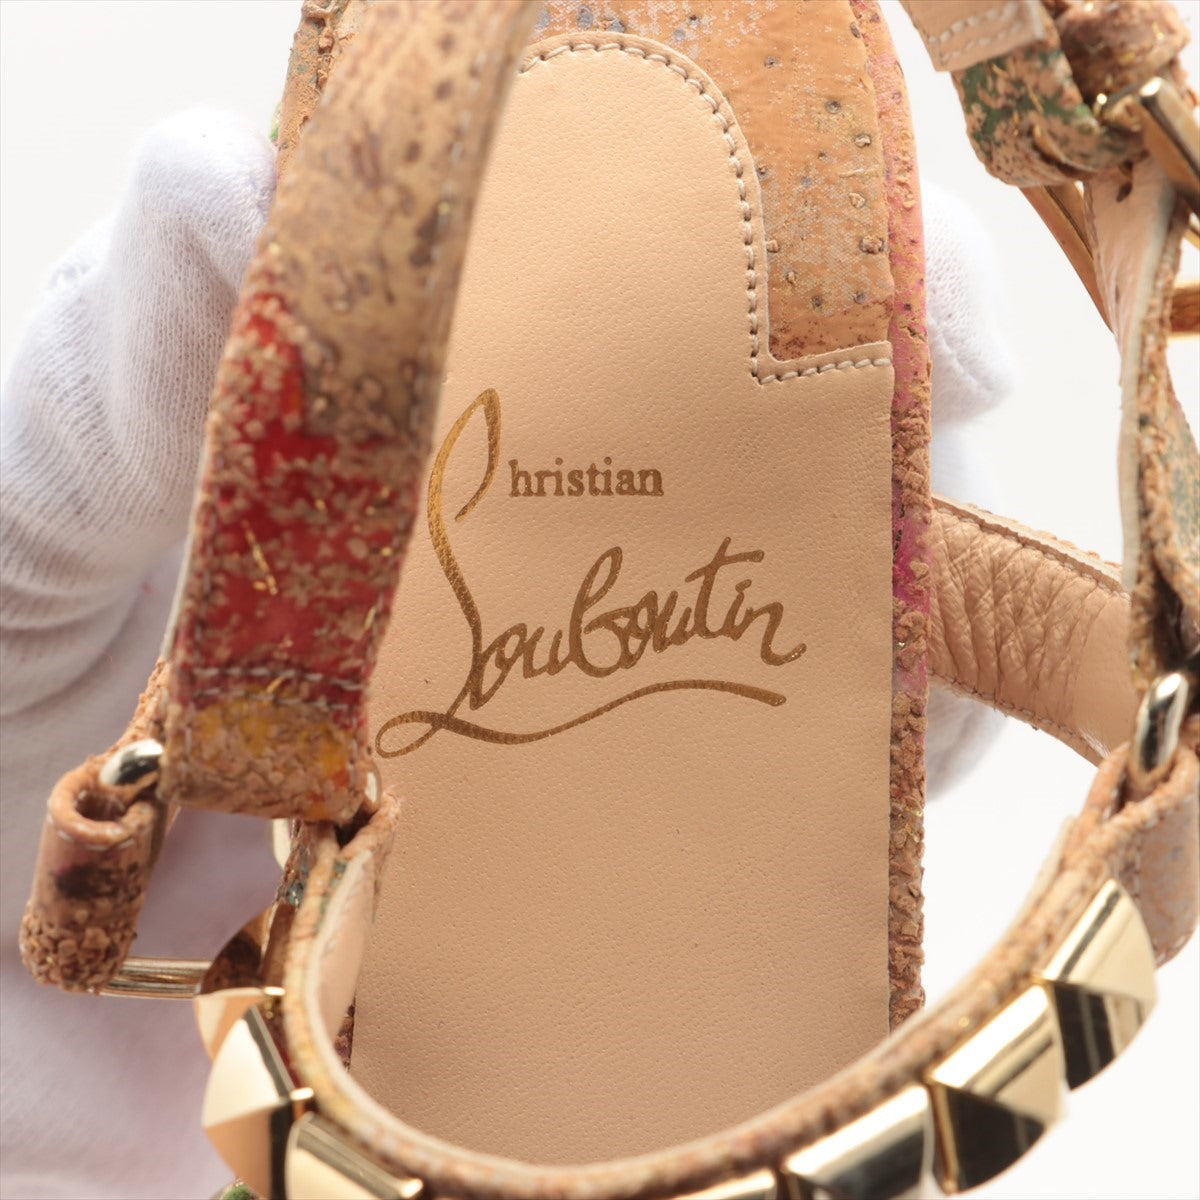 Christian Butterfly Cataclow Leather  Sandal 35  Gold CORK BLOOMING